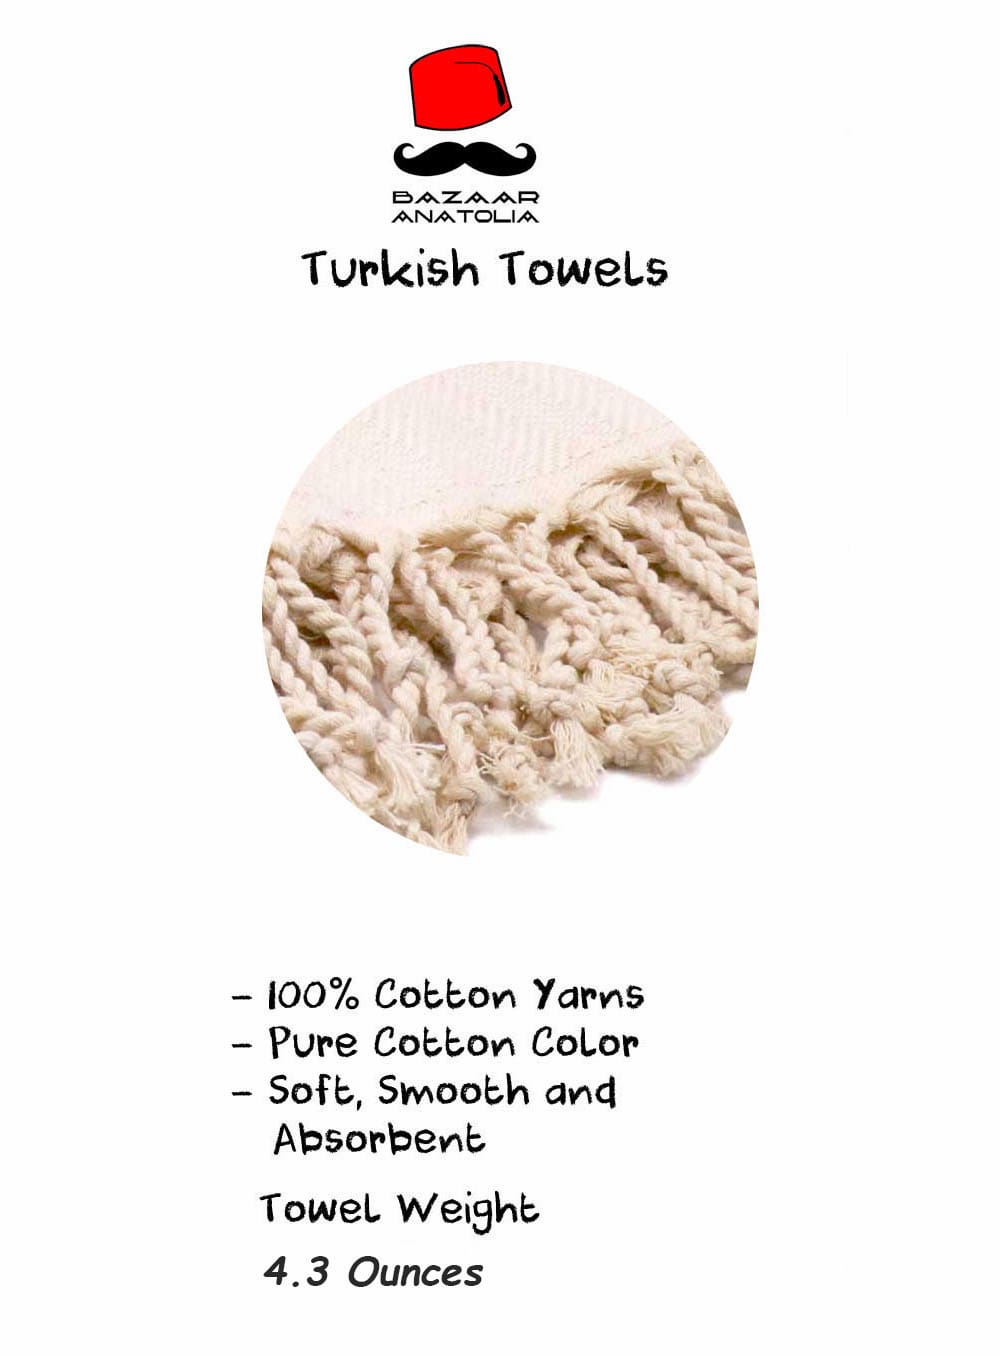 bazaar anatolia turkish towels specs cotton what is so special about turkish towels